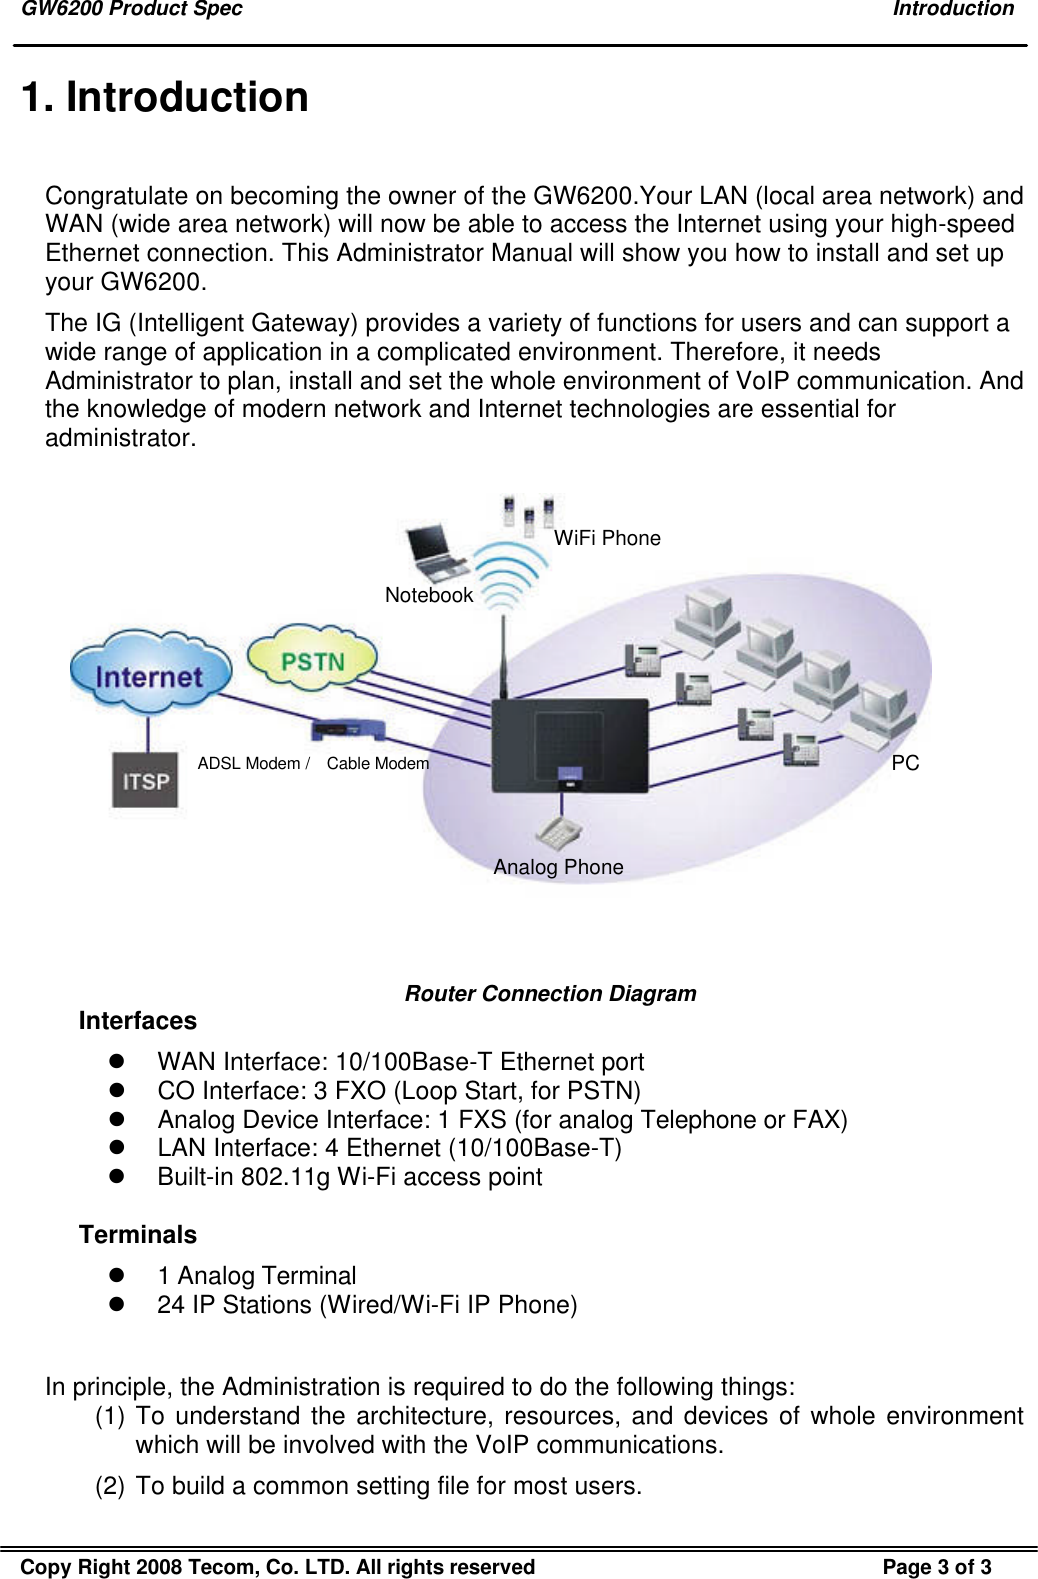 GW6200 Product Spec    Introduction Copy Right 2008 Tecom, Co. LTD. All rights reserved Page 3 of 3  1. Introduction Congratulate on becoming the owner of the GW6200.Your LAN (local area network) and WAN (wide area network) will now be able to access the Internet using your high-speed Ethernet connection. This Administrator Manual will show you how to install and set up your GW6200. The IG (Intelligent Gateway) provides a variety of functions for users and can support a wide range of application in a complicated environment. Therefore, it needs Administrator to plan, install and set the whole environment of VoIP communication. And the knowledge of modern network and Internet technologies are essential for administrator.  Analog PhoneADSL Modem /  Cable ModemWiFi PhoneNotebookPC  Router Connection Diagram Interfaces l WAN Interface: 10/100Base-T Ethernet port l CO Interface: 3 FXO (Loop Start, for PSTN) l Analog Device Interface: 1 FXS (for analog Telephone or FAX) l LAN Interface: 4 Ethernet (10/100Base-T) l Built-in 802.11g Wi-Fi access point  Terminals l 1 Analog Terminal l 24 IP Stations (Wired/Wi-Fi IP Phone)  In principle, the Administration is required to do the following things: (1) To understand the architecture, resources, and devices of whole environment which will be involved with the VoIP communications. (2) To build a common setting file for most users. 